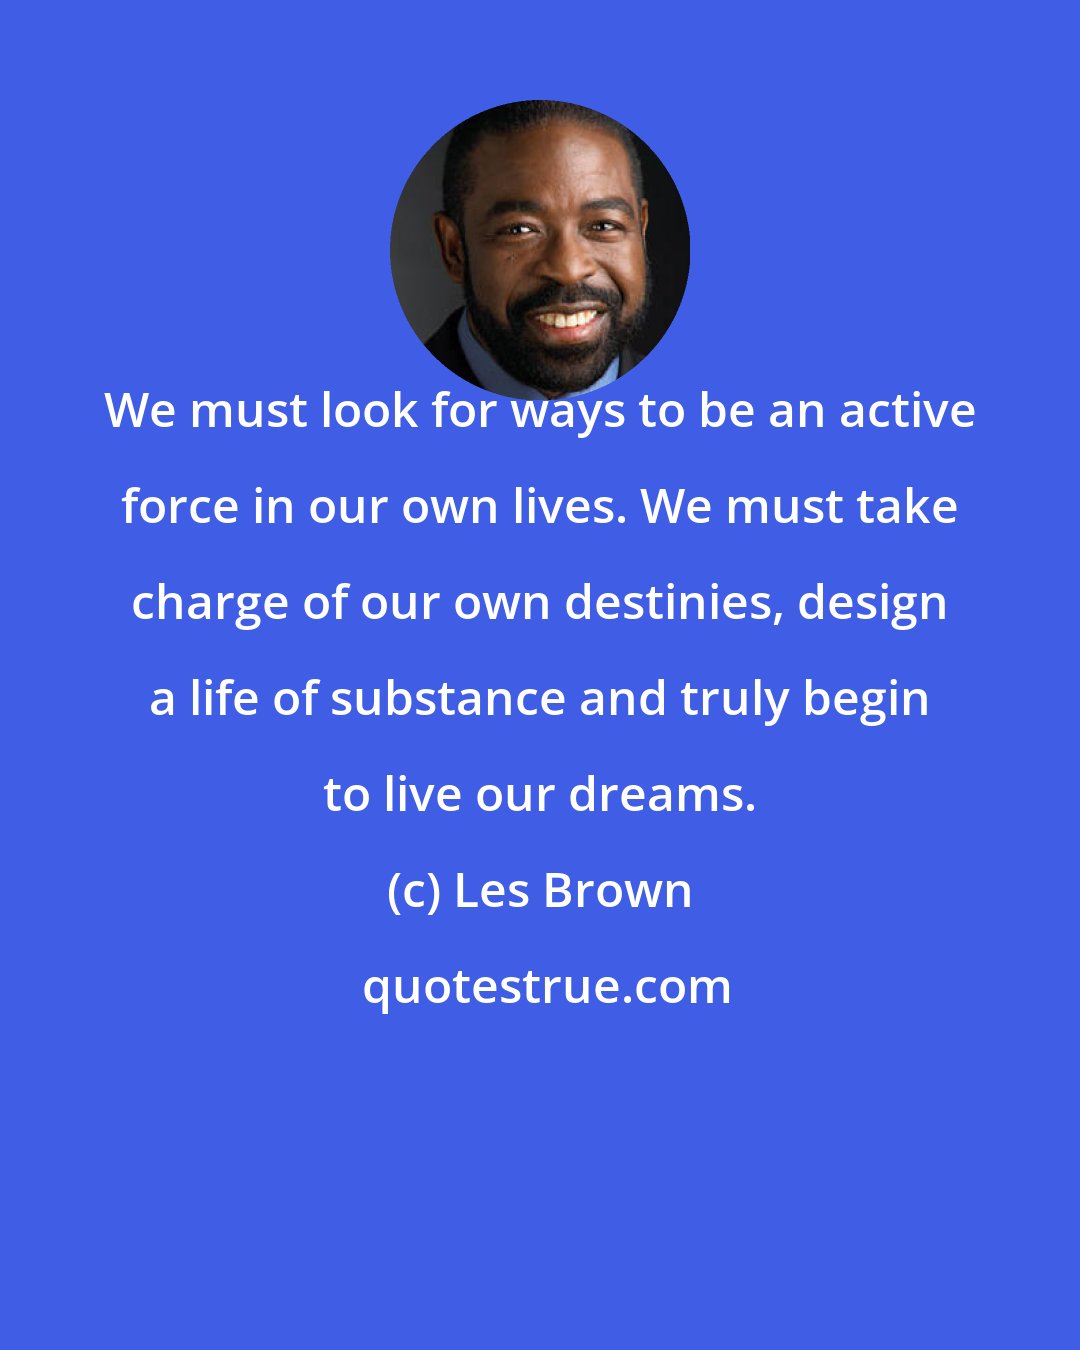 Les Brown: We must look for ways to be an active force in our own lives. We must take charge of our own destinies, design a life of substance and truly begin to live our dreams.